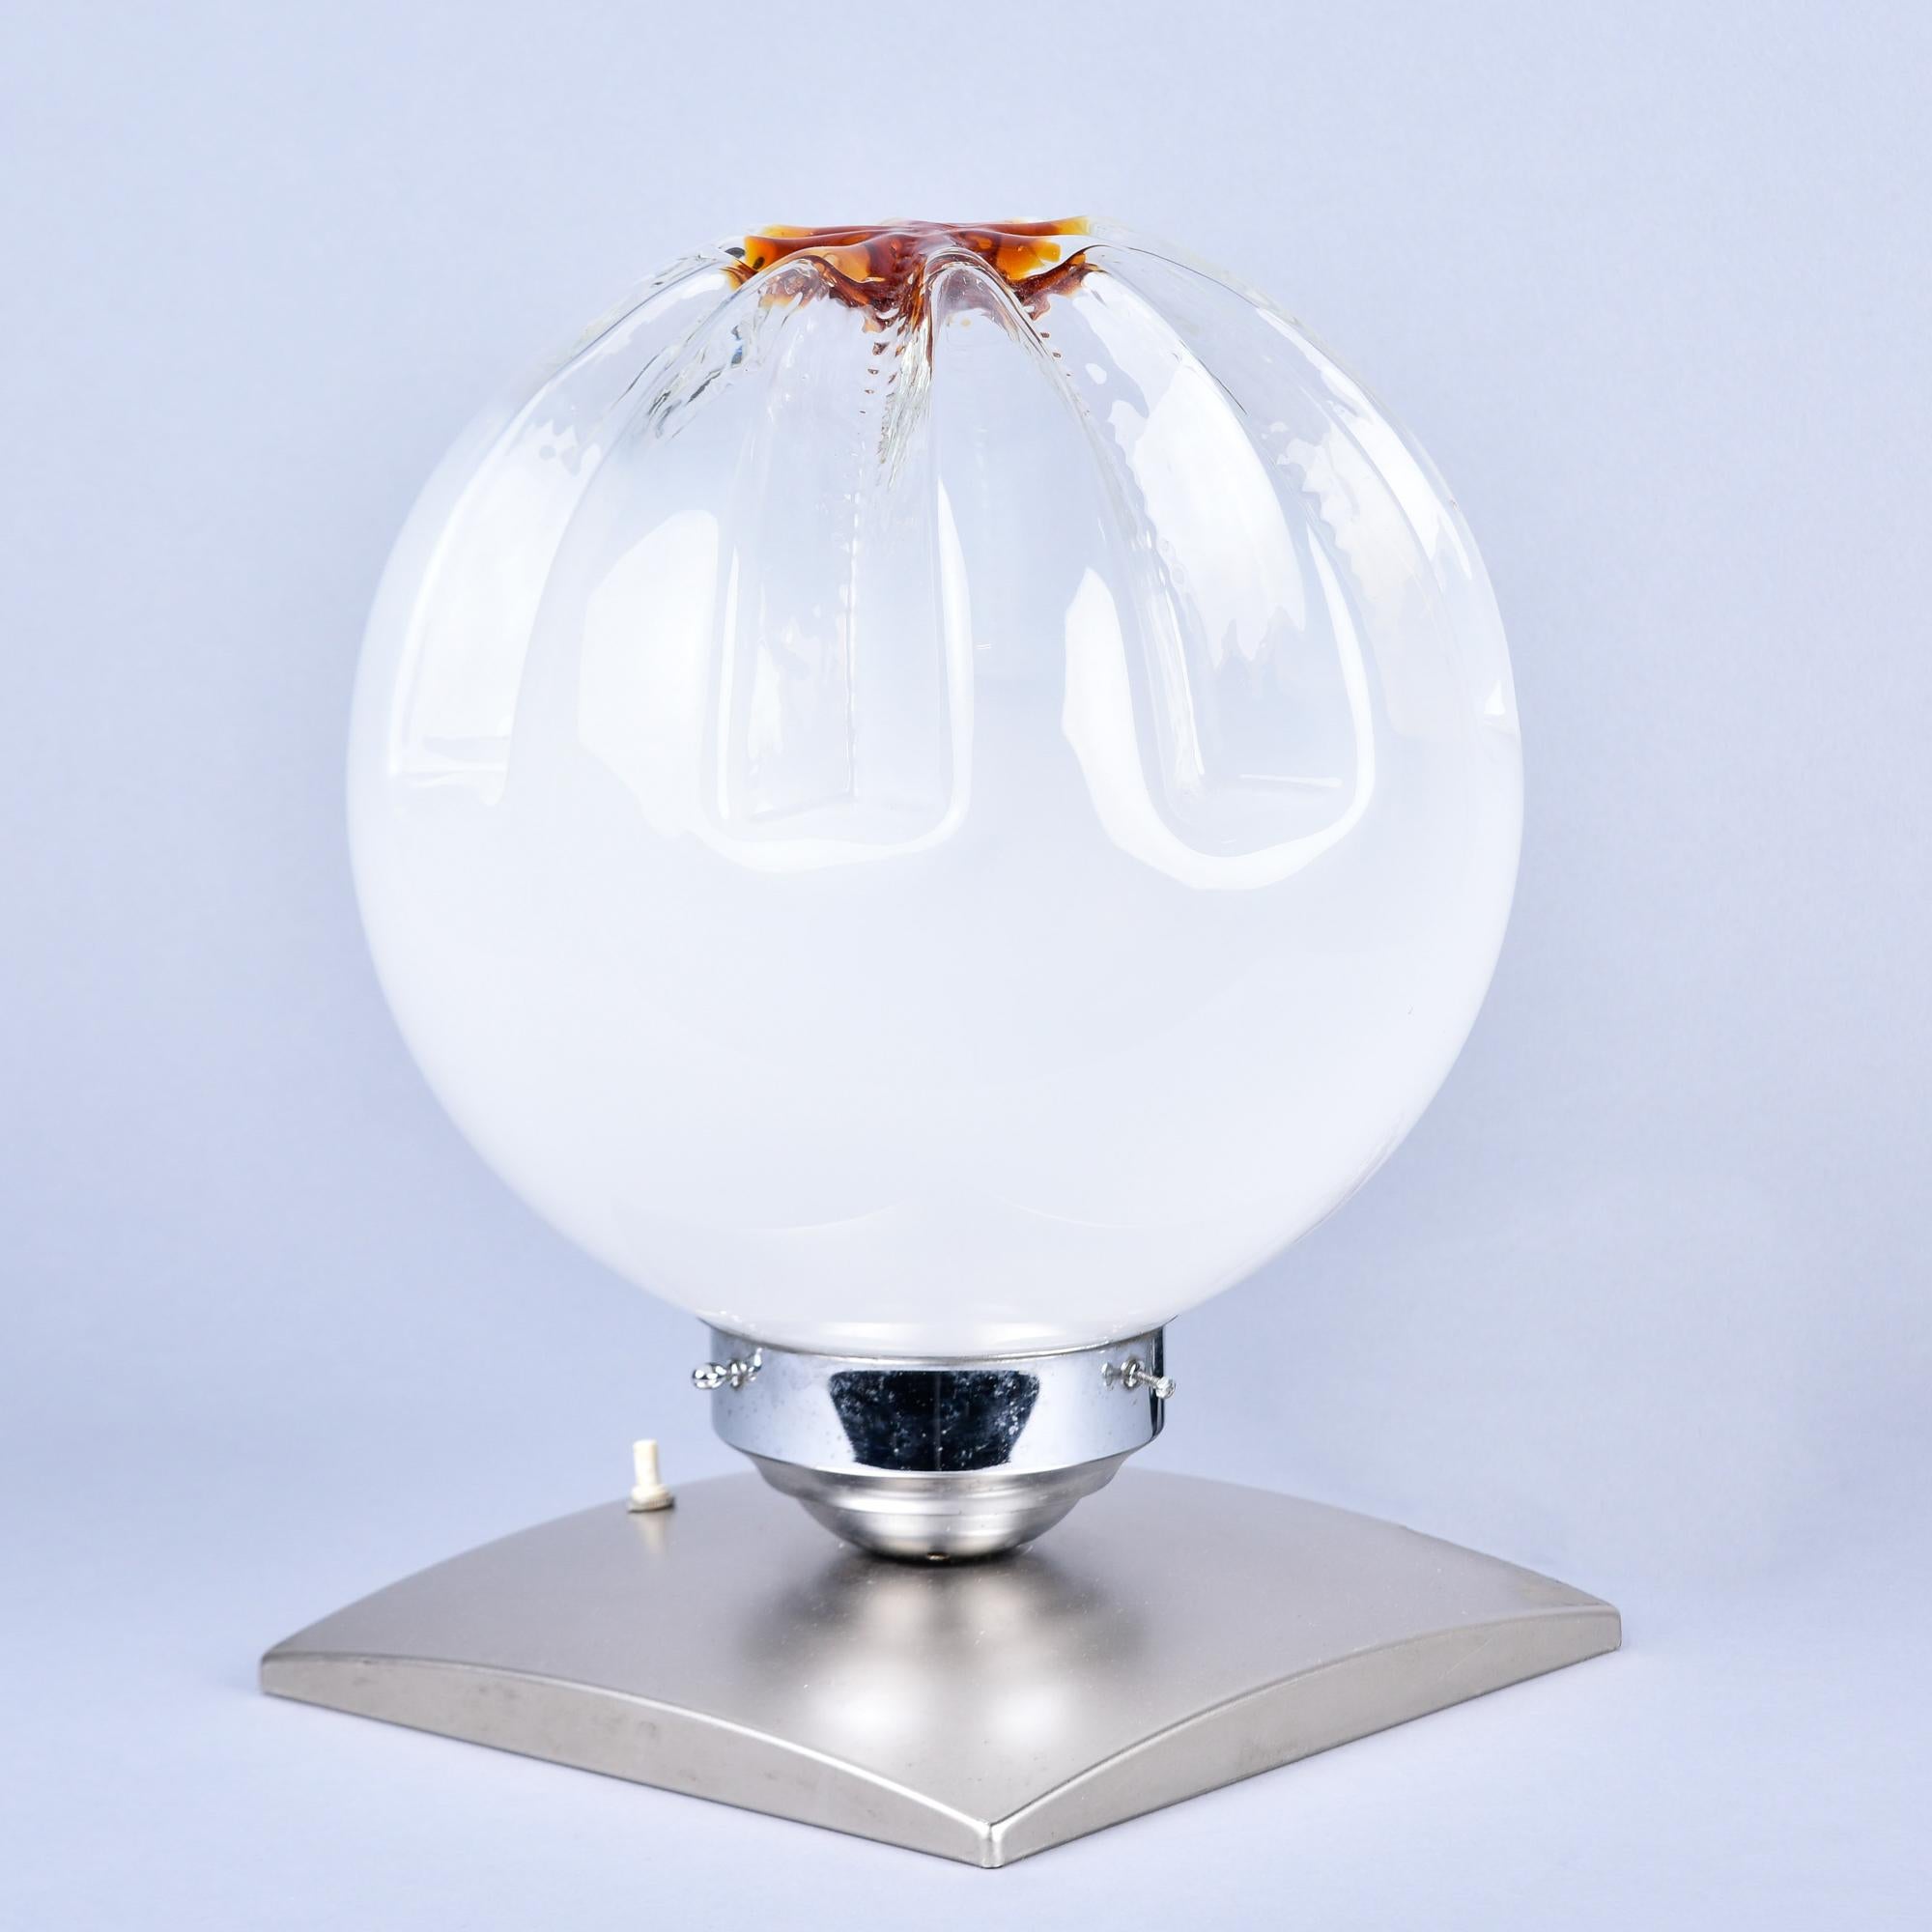 Found in Italy, this Mazzego table lamp dates from the 1970s. Single Mazzega Murano glass globe in one of their signature styles: White semi-opaque glass with indented, gathered sides and a rust colored accent at the top portion. Glass globe is set